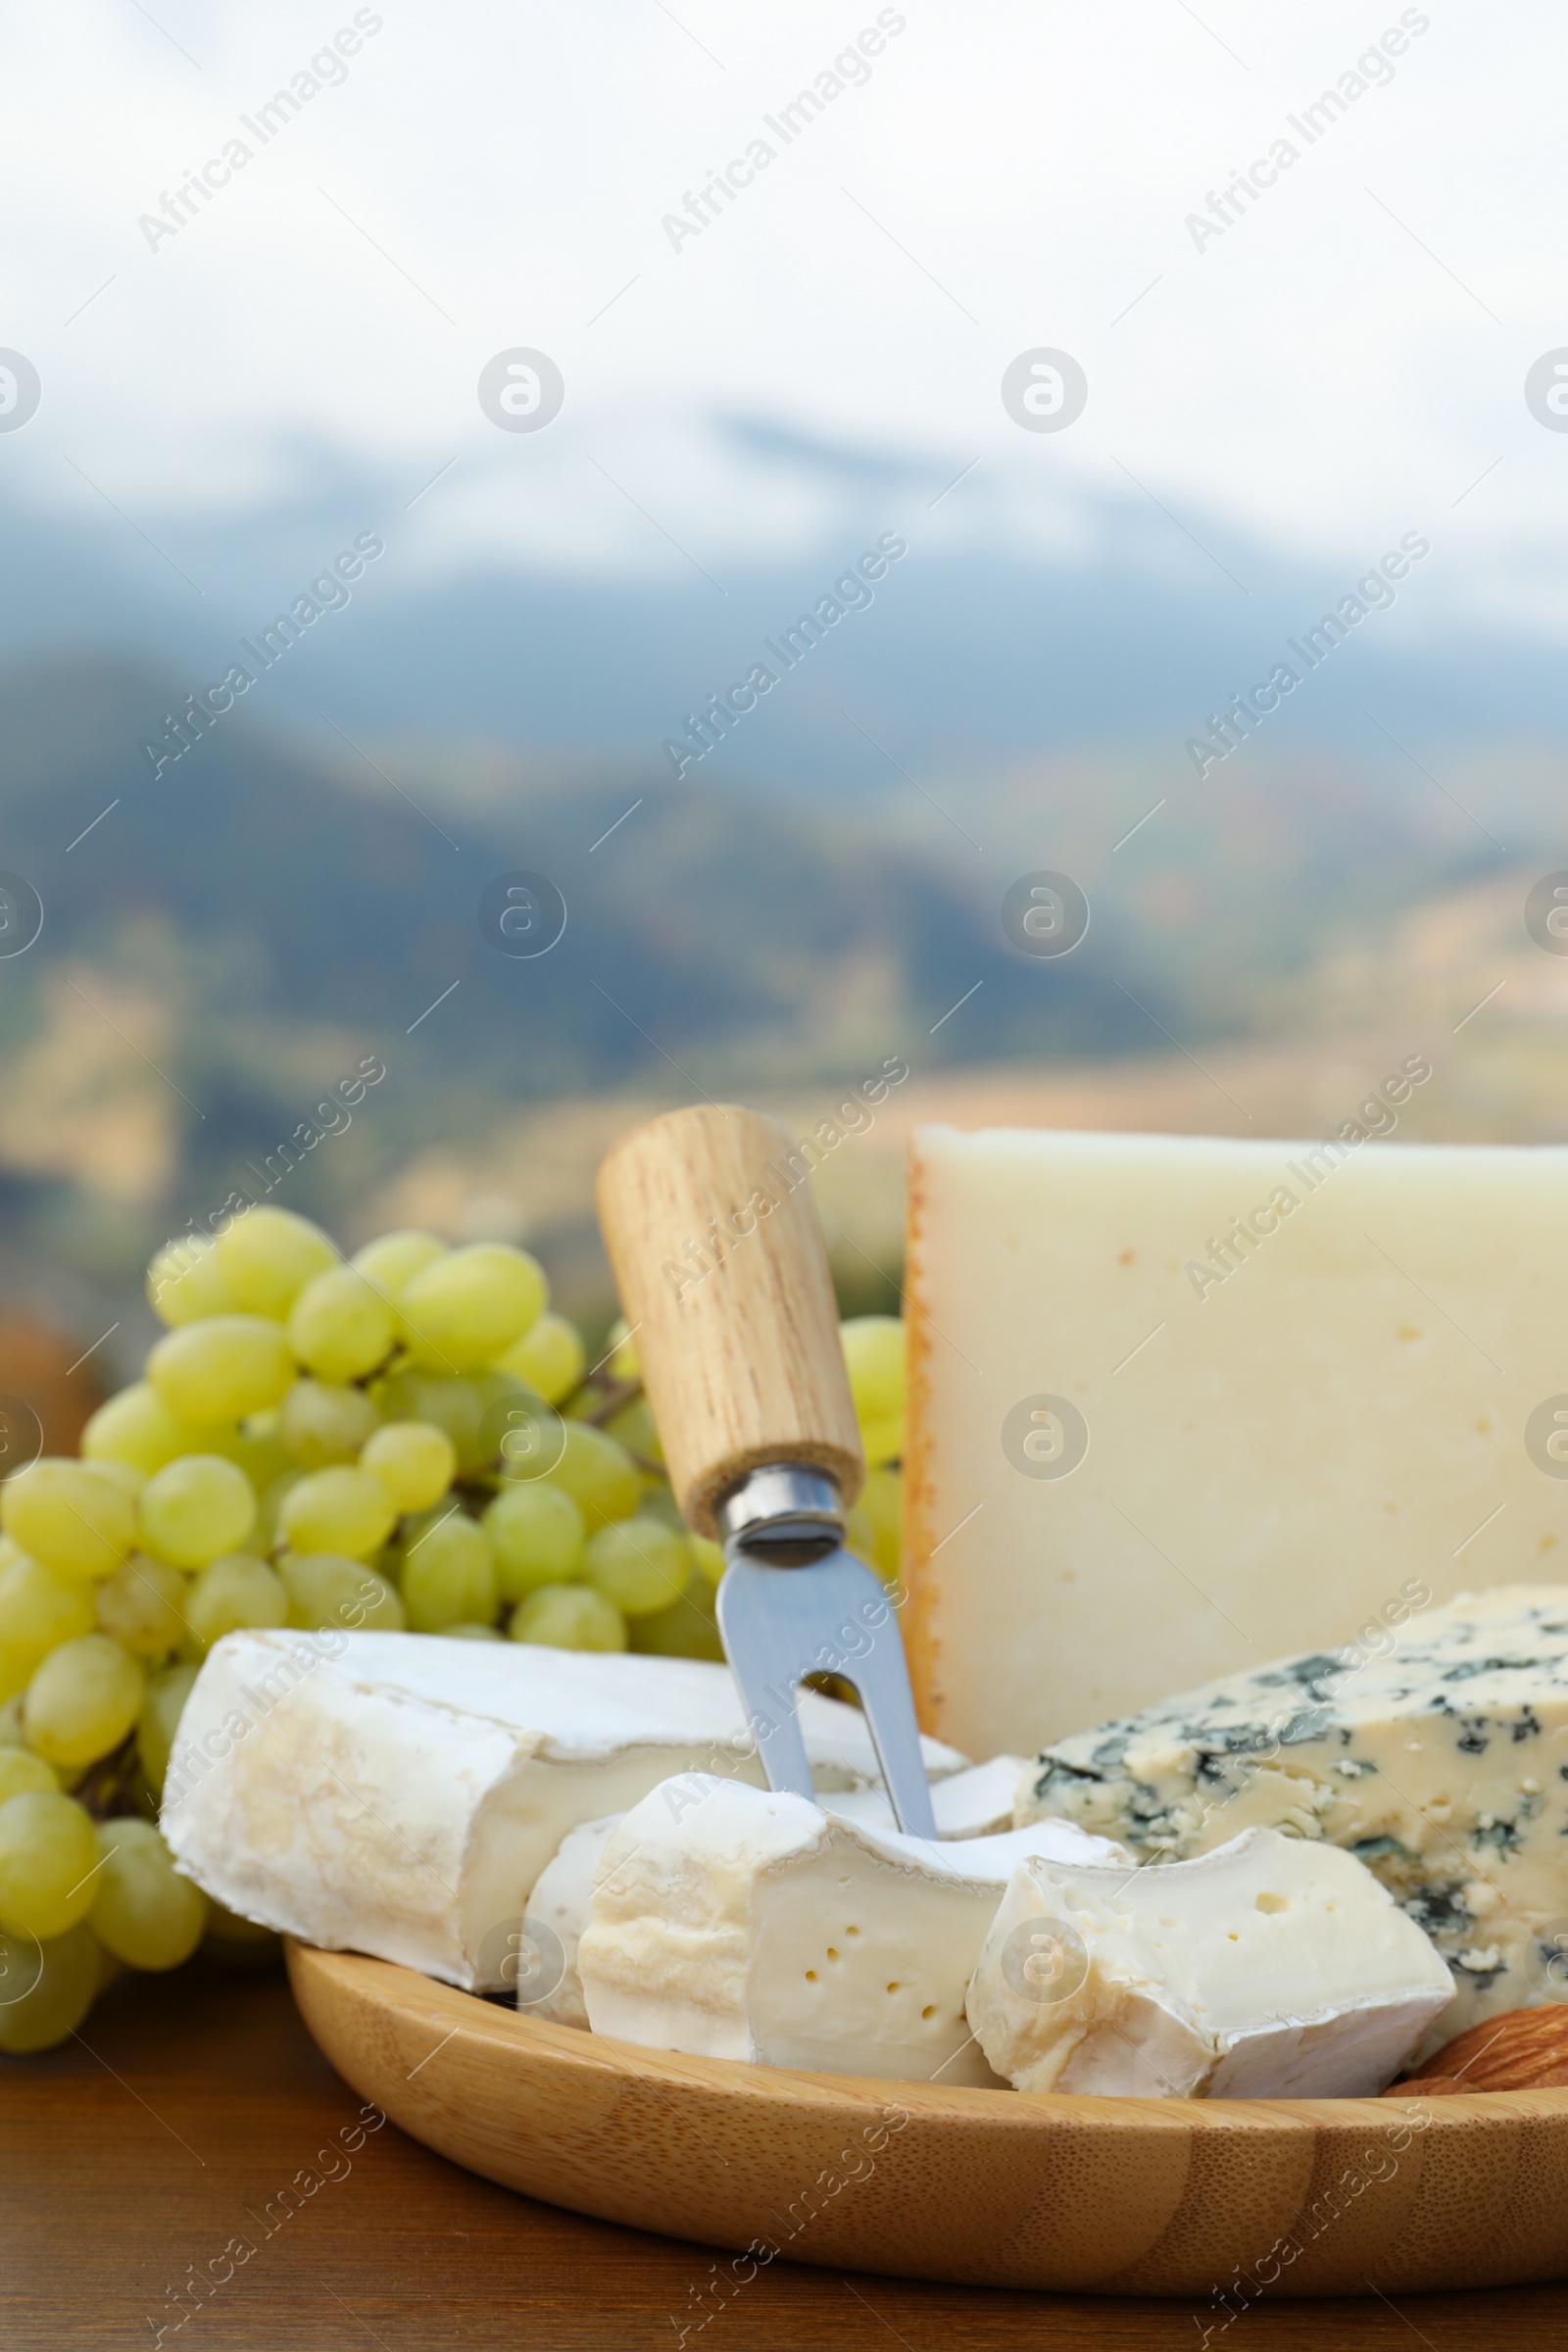 Photo of Different types of delicious cheeses, nuts and grapes on wooden table against mountain landscape